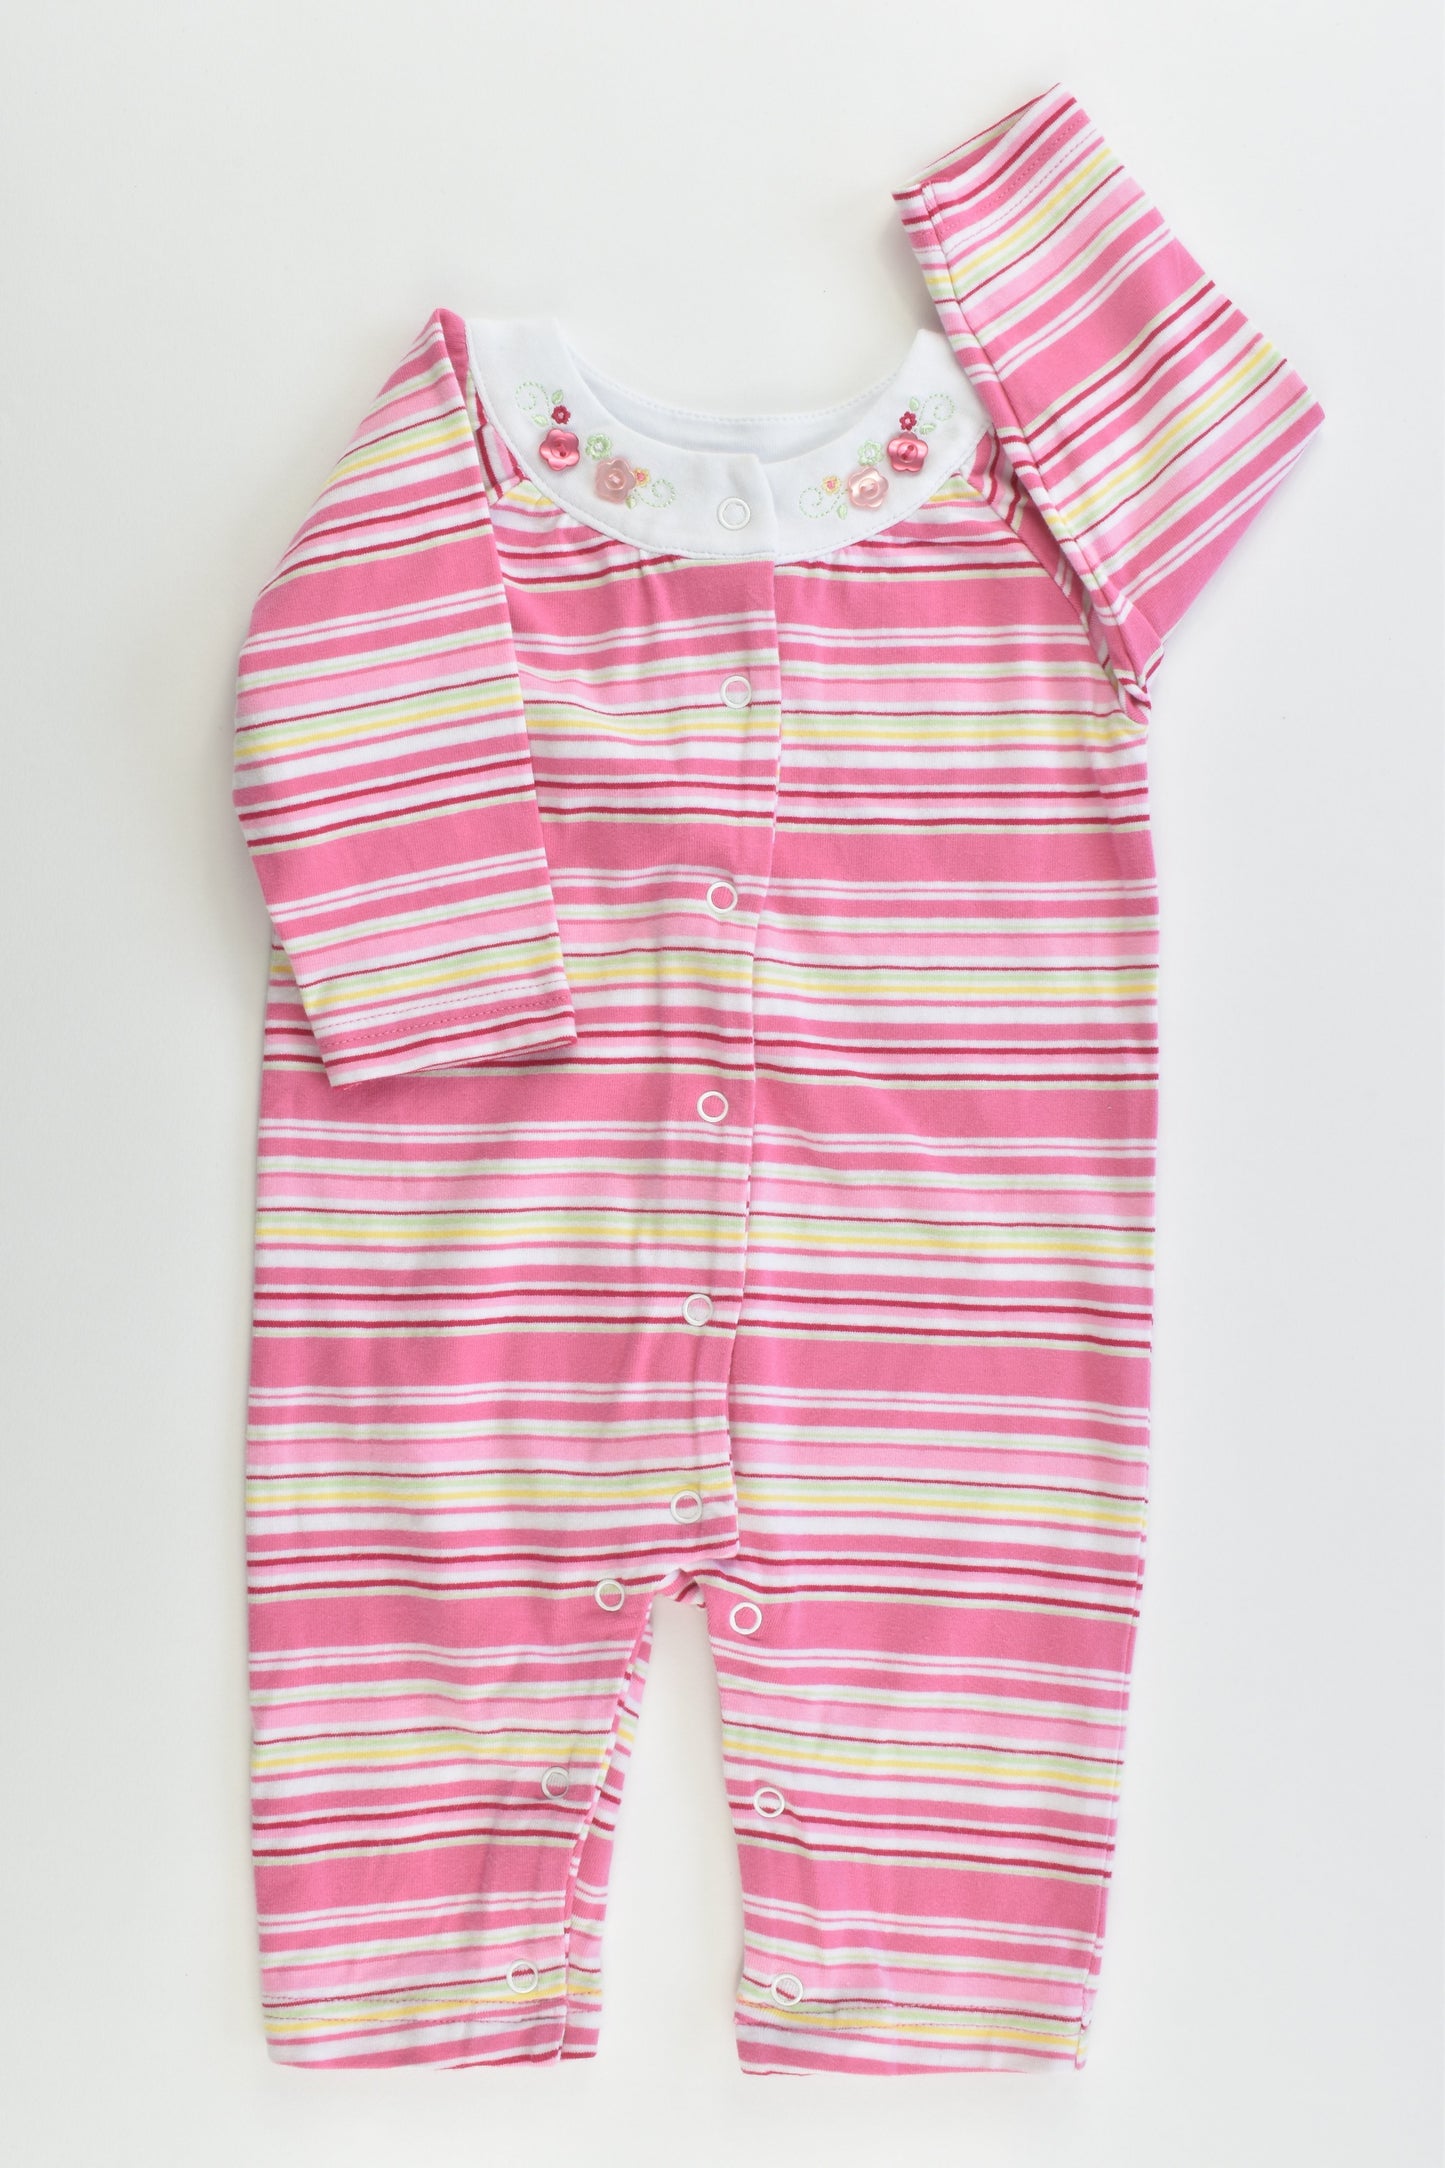 NEW Sprout Size 000 Striped Romper